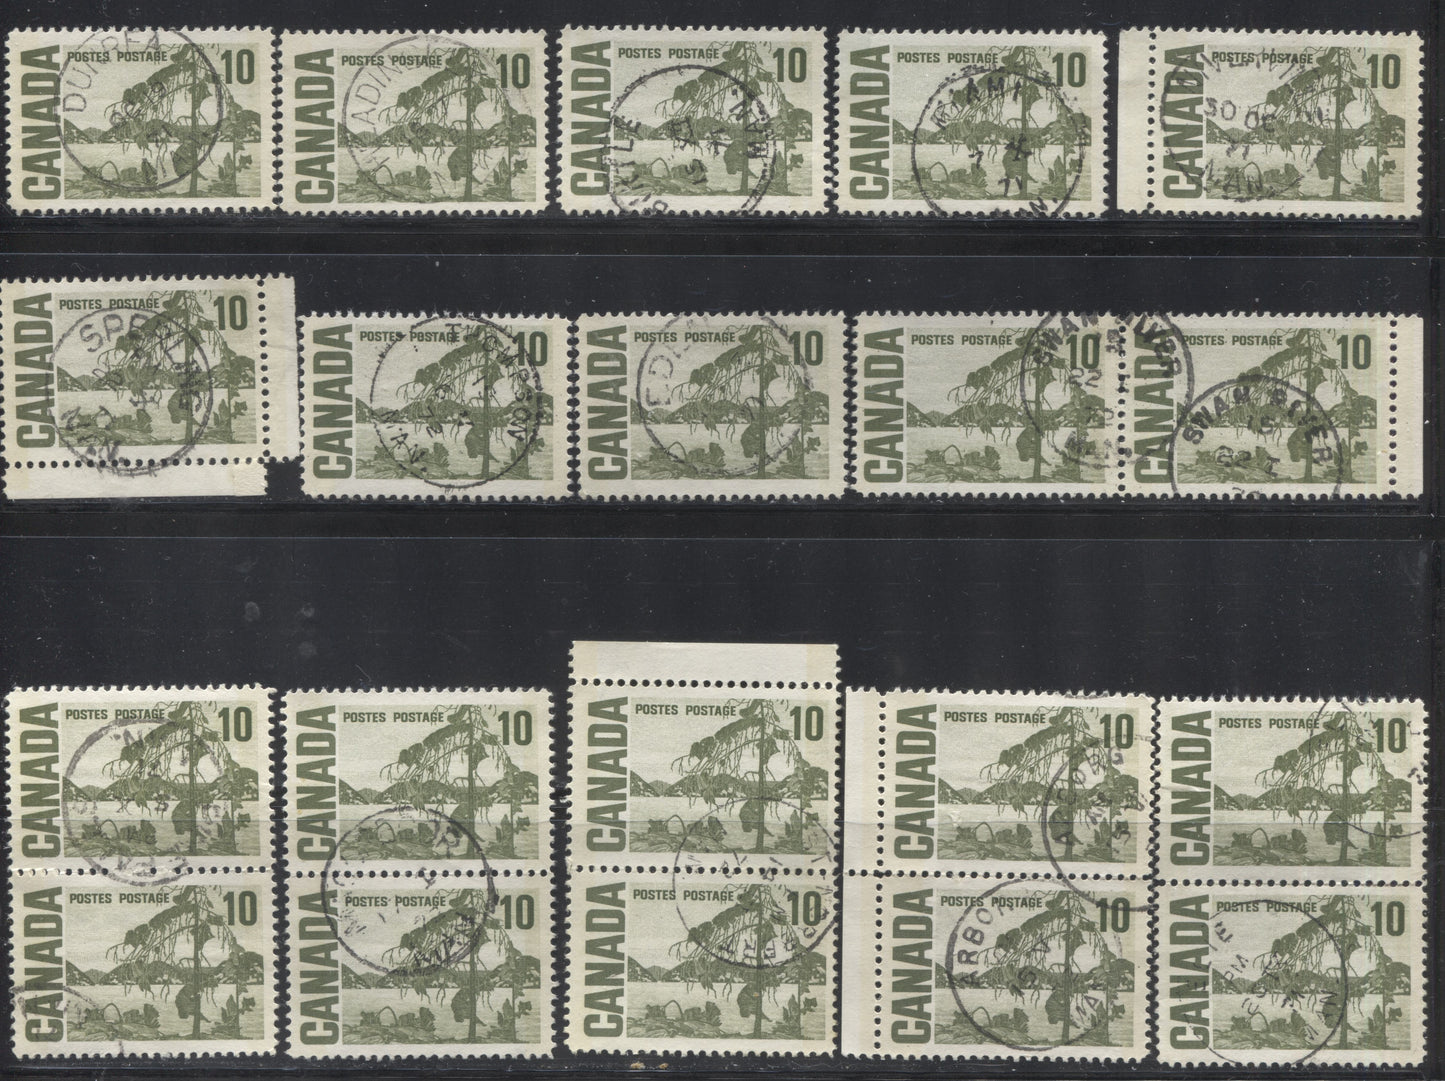 Lot 61 Canada #462p 10c Olive Green Jack Pine, 1967-1973 Centennial Definitive Issue, 15 Very Fine Used Tagged Singles And Vertical Pairs On DF Papers Different Cancelations, Mostly CDS